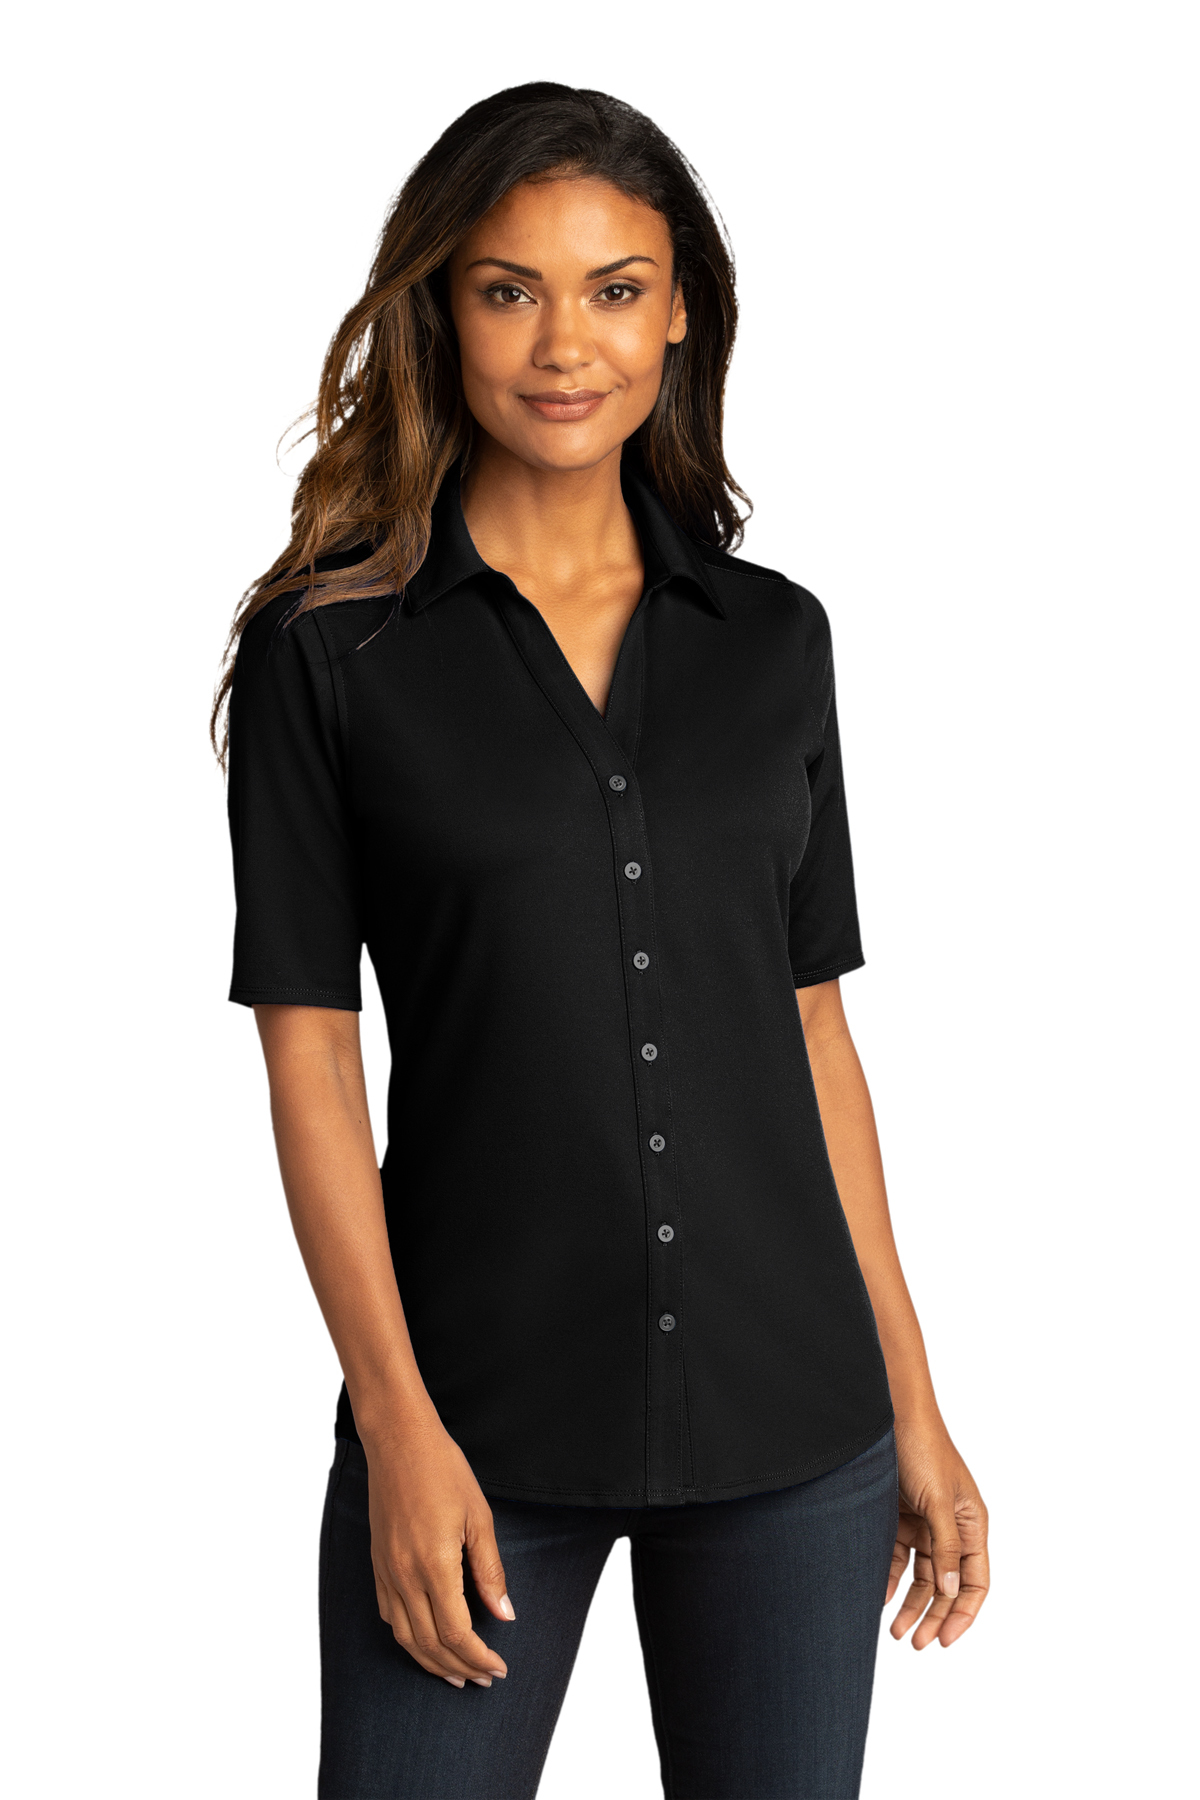 Port Authority Ladies City Stretch Top | Product | Company Casuals